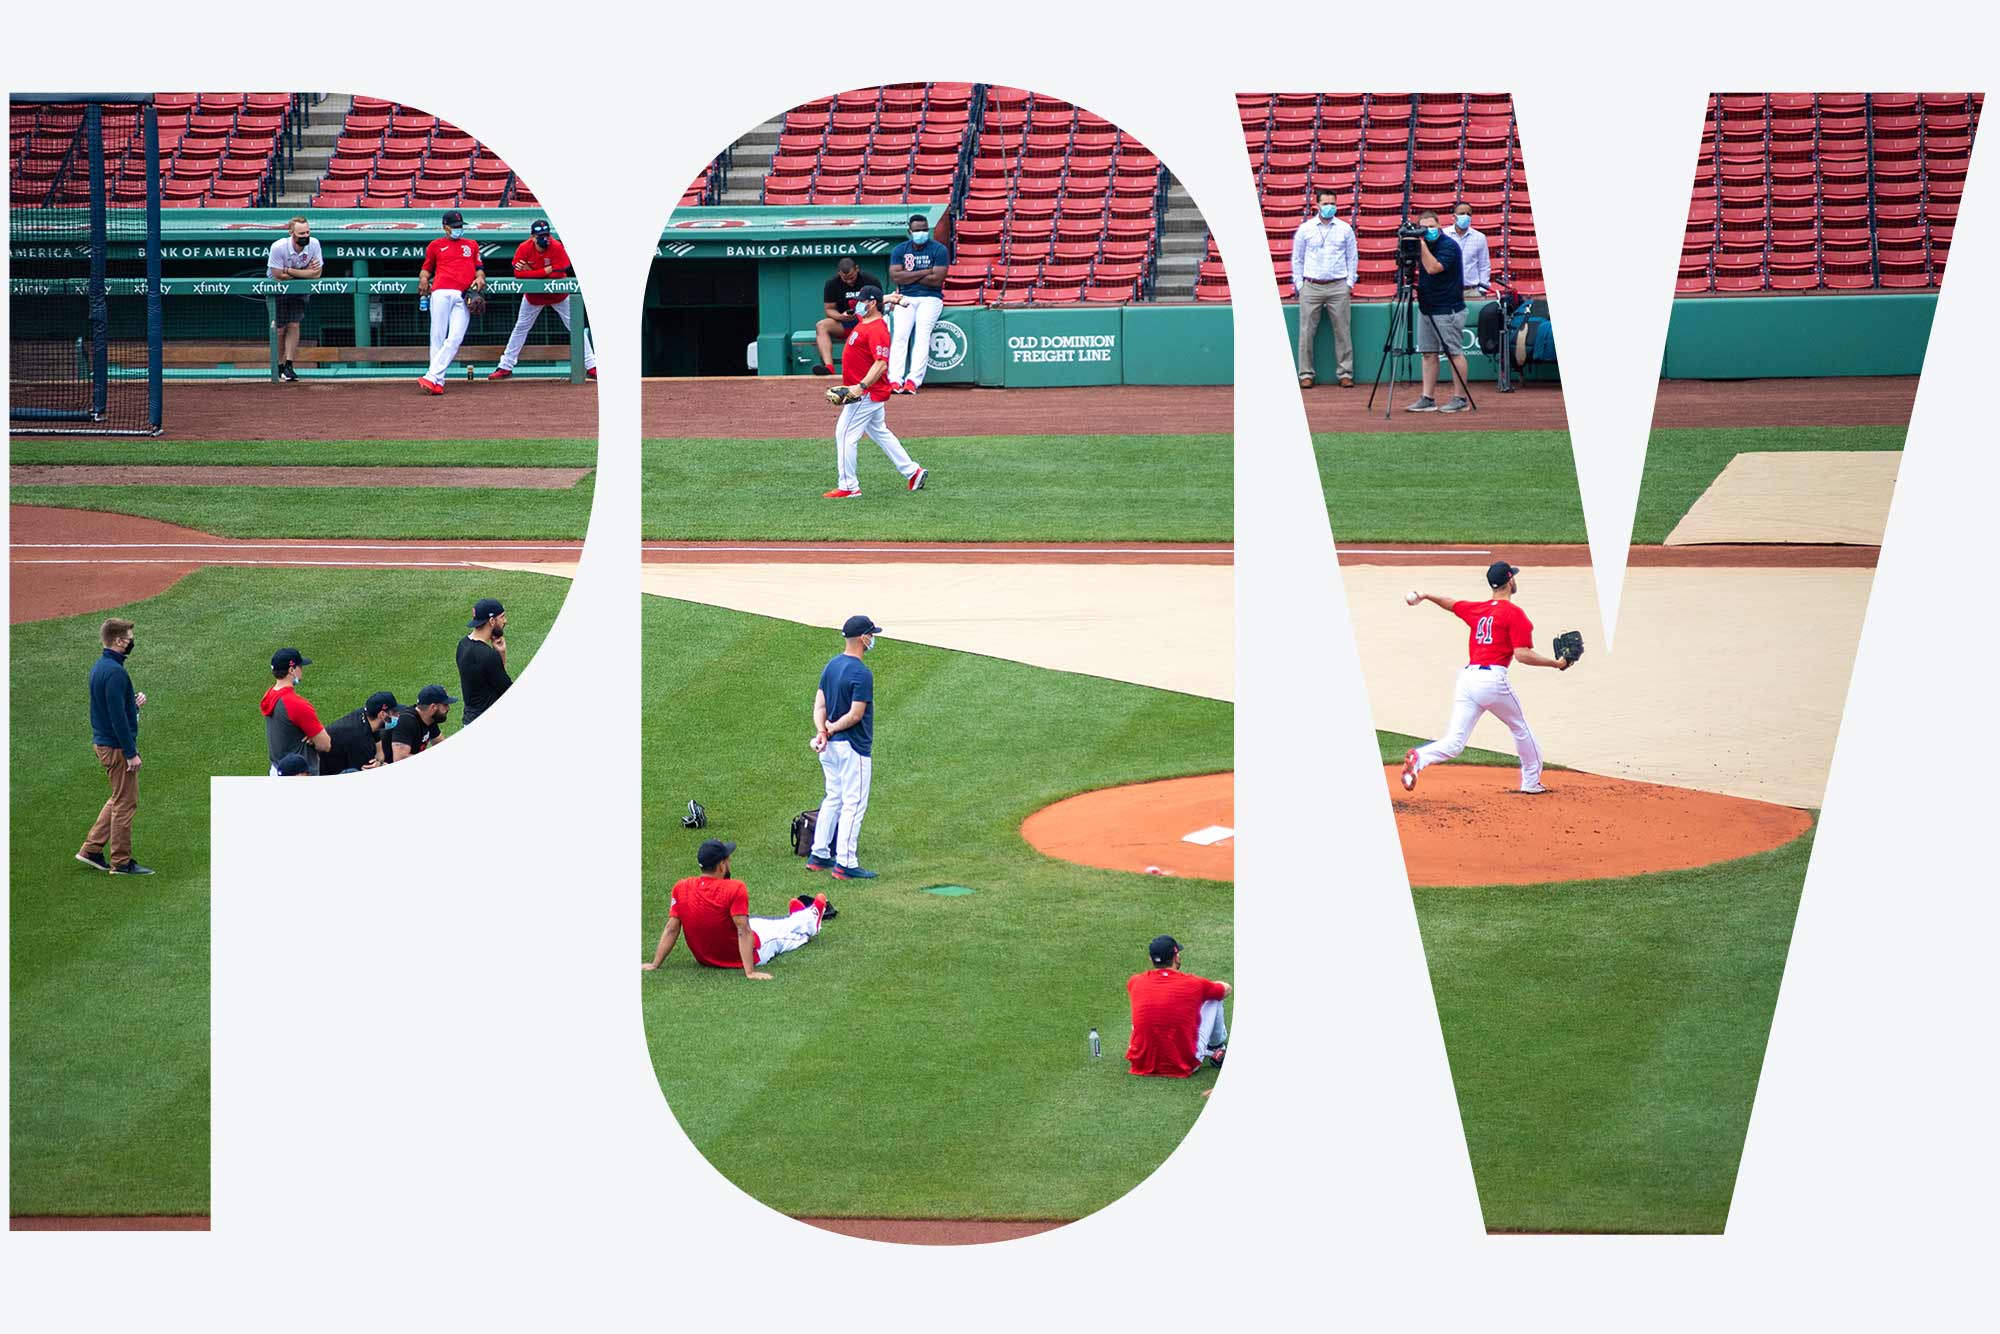 Pitcher Chris Sale practices on the mound while team mates watch. Red sox team members dressed in red and blue stand behind the mound, and Sale is seen mid pitch. The photo was taken during a practice on June 11, 2021 and the red seats in the stands are empty. Overlay reads "POV"